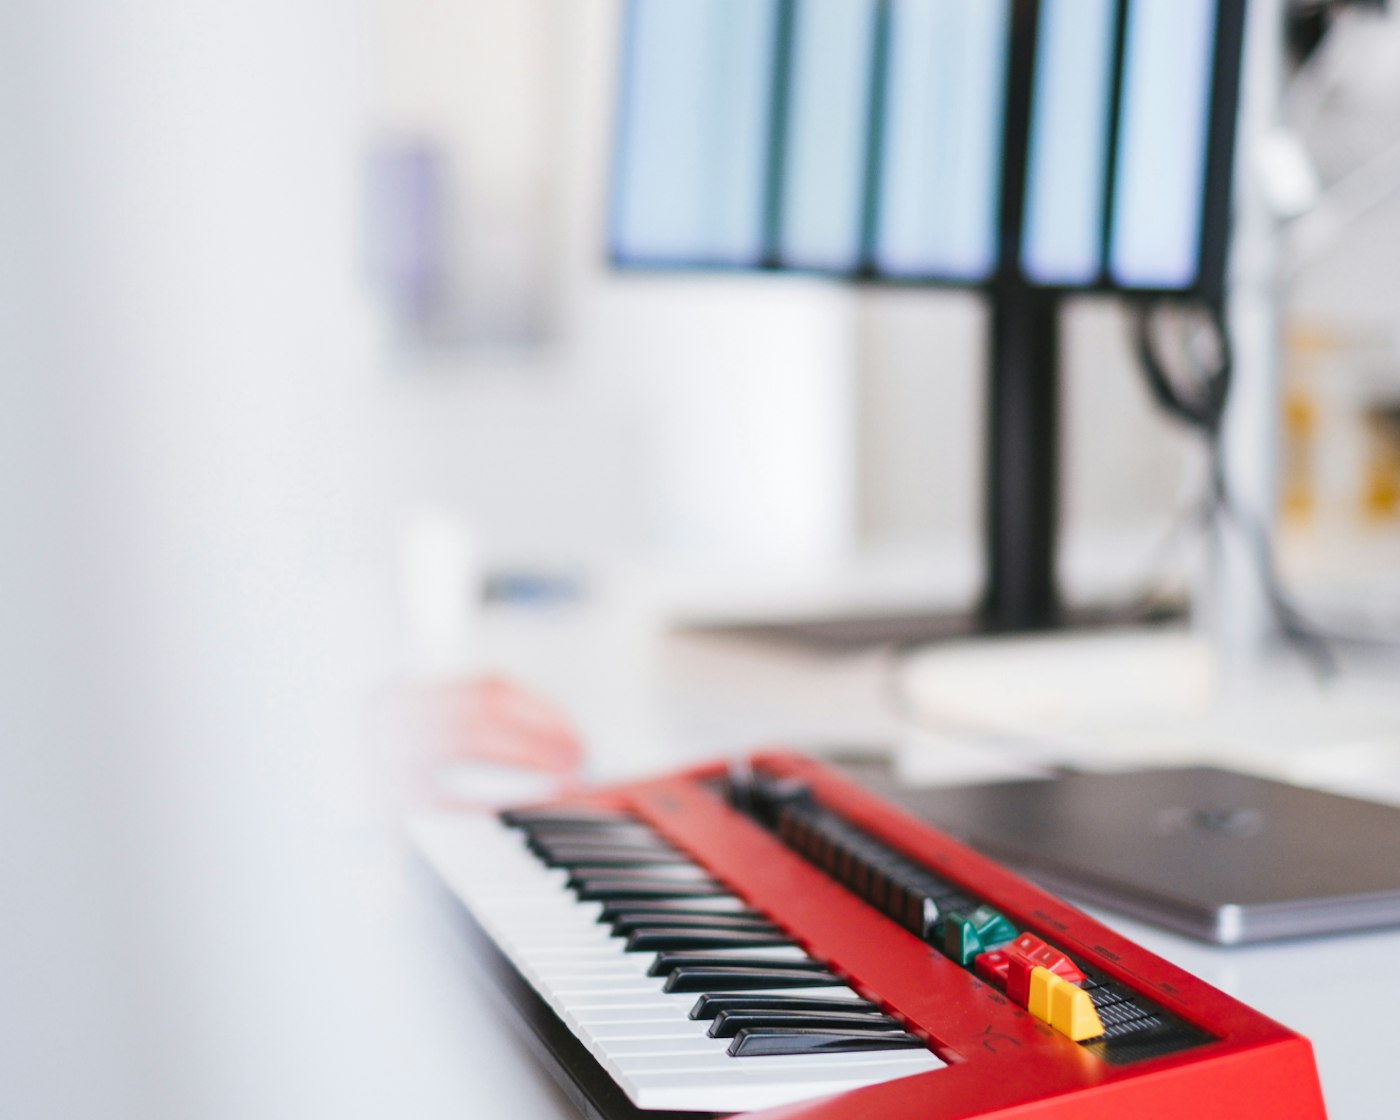 Synthesizer with red casing in focus on a desk in the white Yummygum office. Just out of focus is a closed laptop and a display.